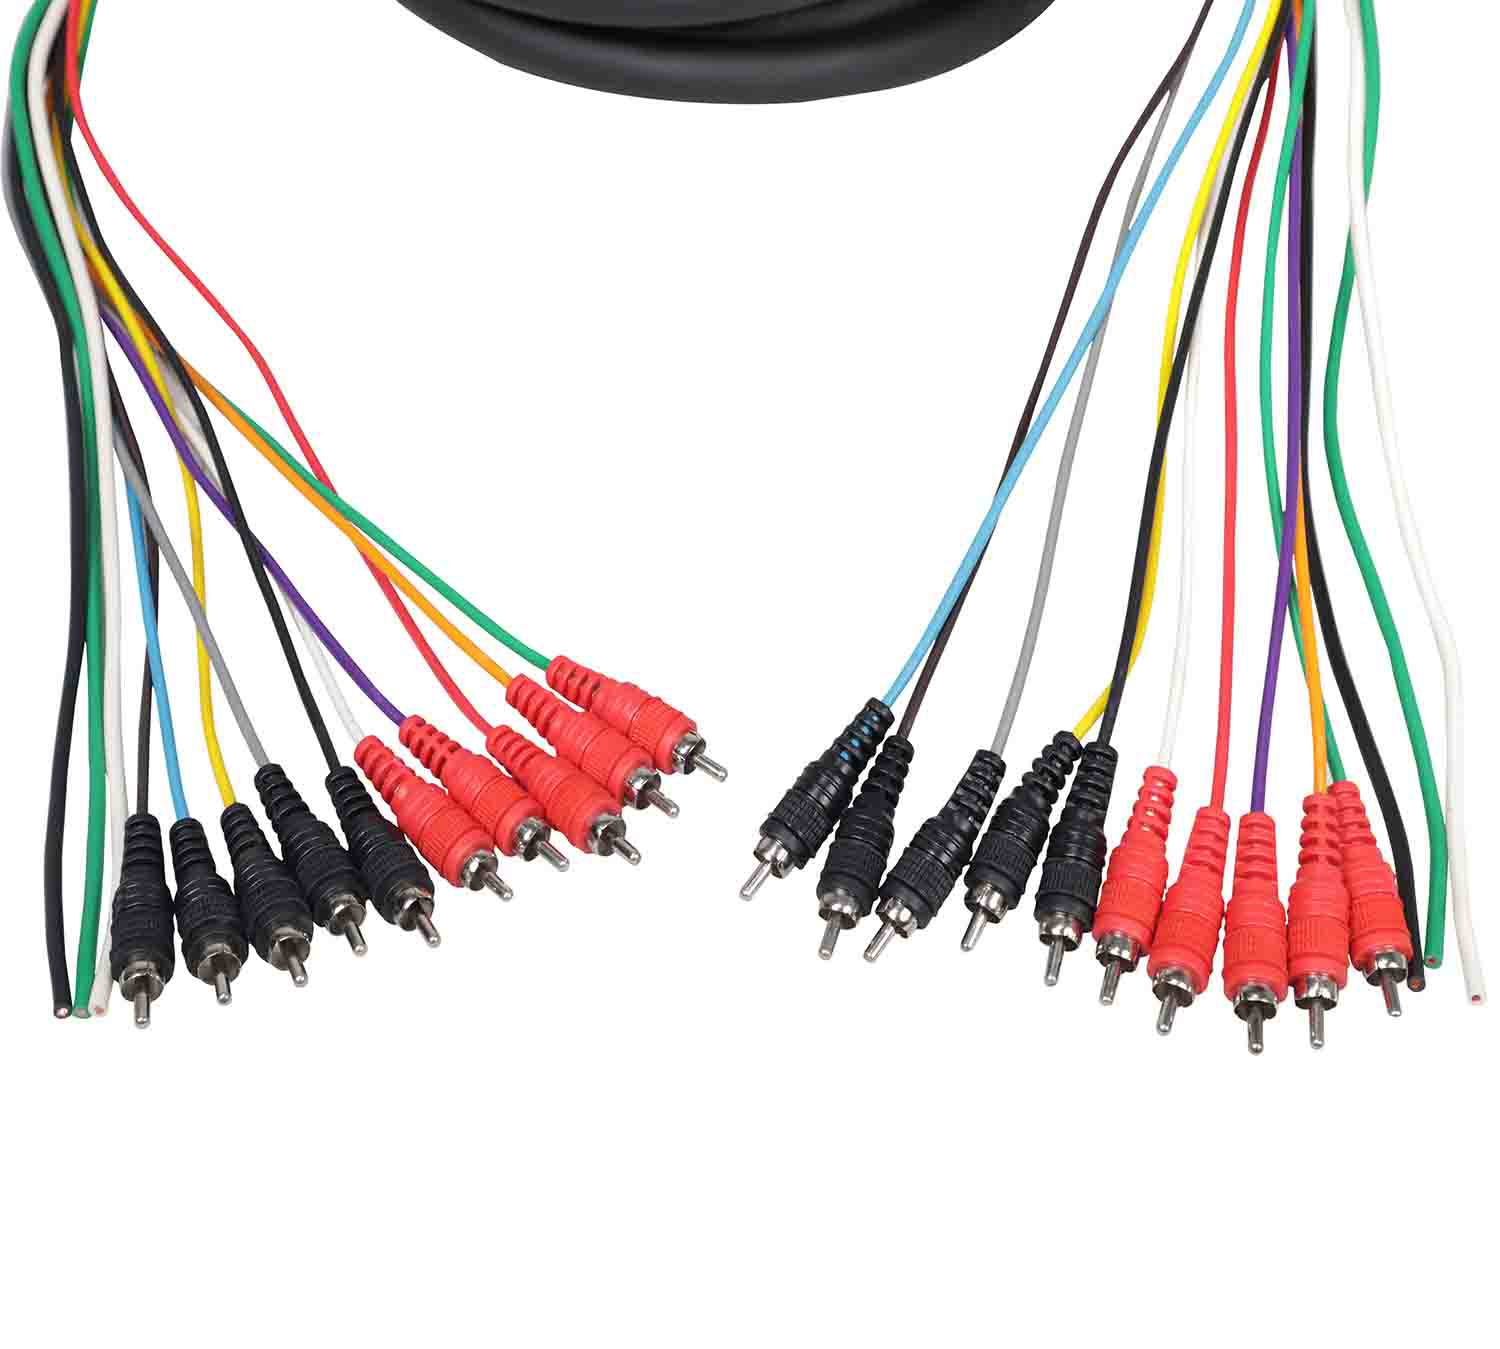 ProX XC-MEDOOZA75, 10 RCA Channel + 3 Power Cable for Marine and Car Audio - 75 Feet - Hollywood DJ